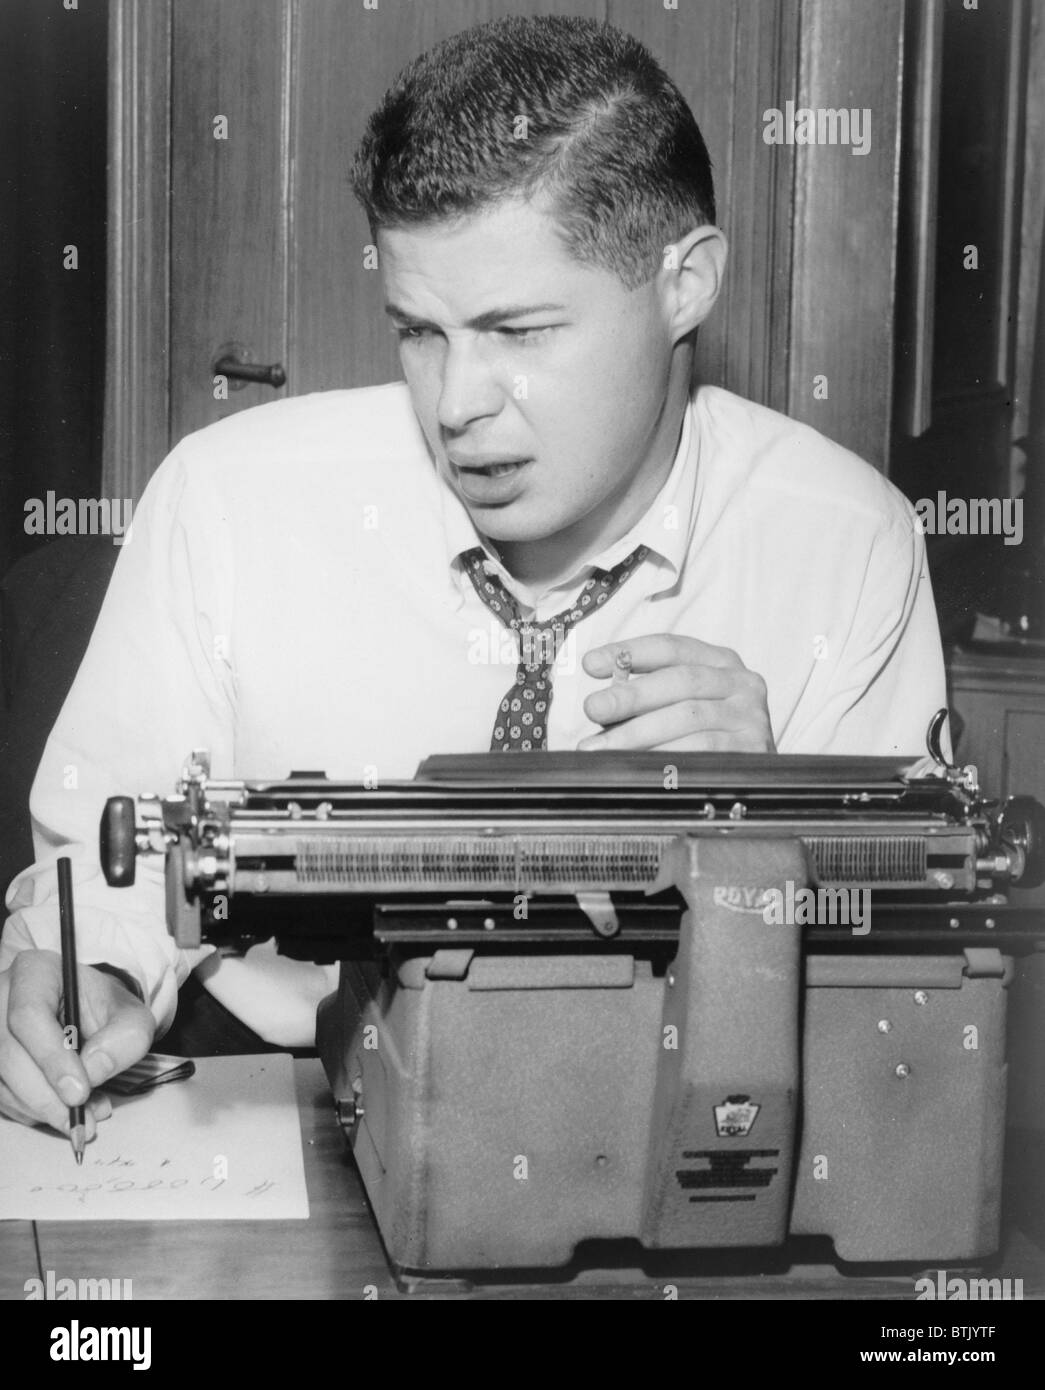 George Axelrod (1922-2003), playwright and screenwriter, seated at typewriter. Axelrod 's plays include, SEVEN YEAR ITCH and WILL SUCCESS SPOIL ROCK HUNTER? He wrote screenplays for BUS STOP, BREAKFAST AY TIFFANY'S, THE MANCHURIAN CANDIDATE, and LORD LOVE A DUCK. Stock Photo